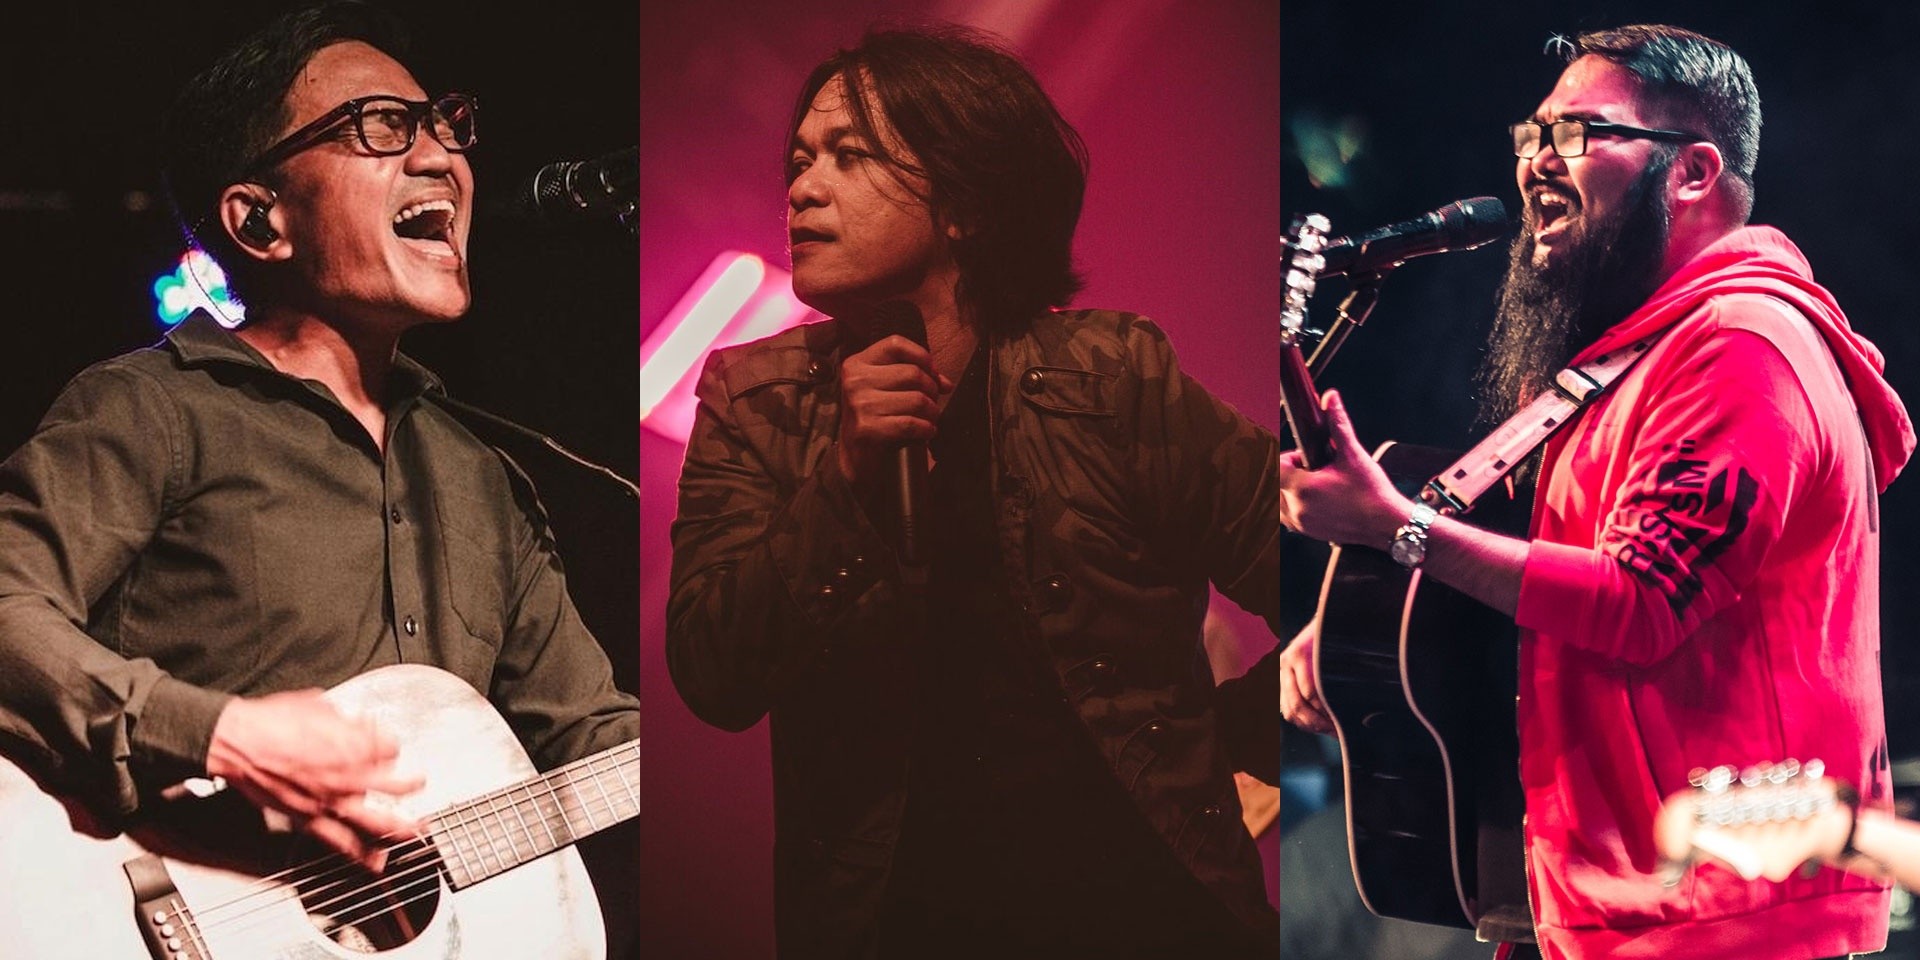 Ebe Dancel, Sandwich, I Belong to the Zoo, and more to share the stage and some burgers this August